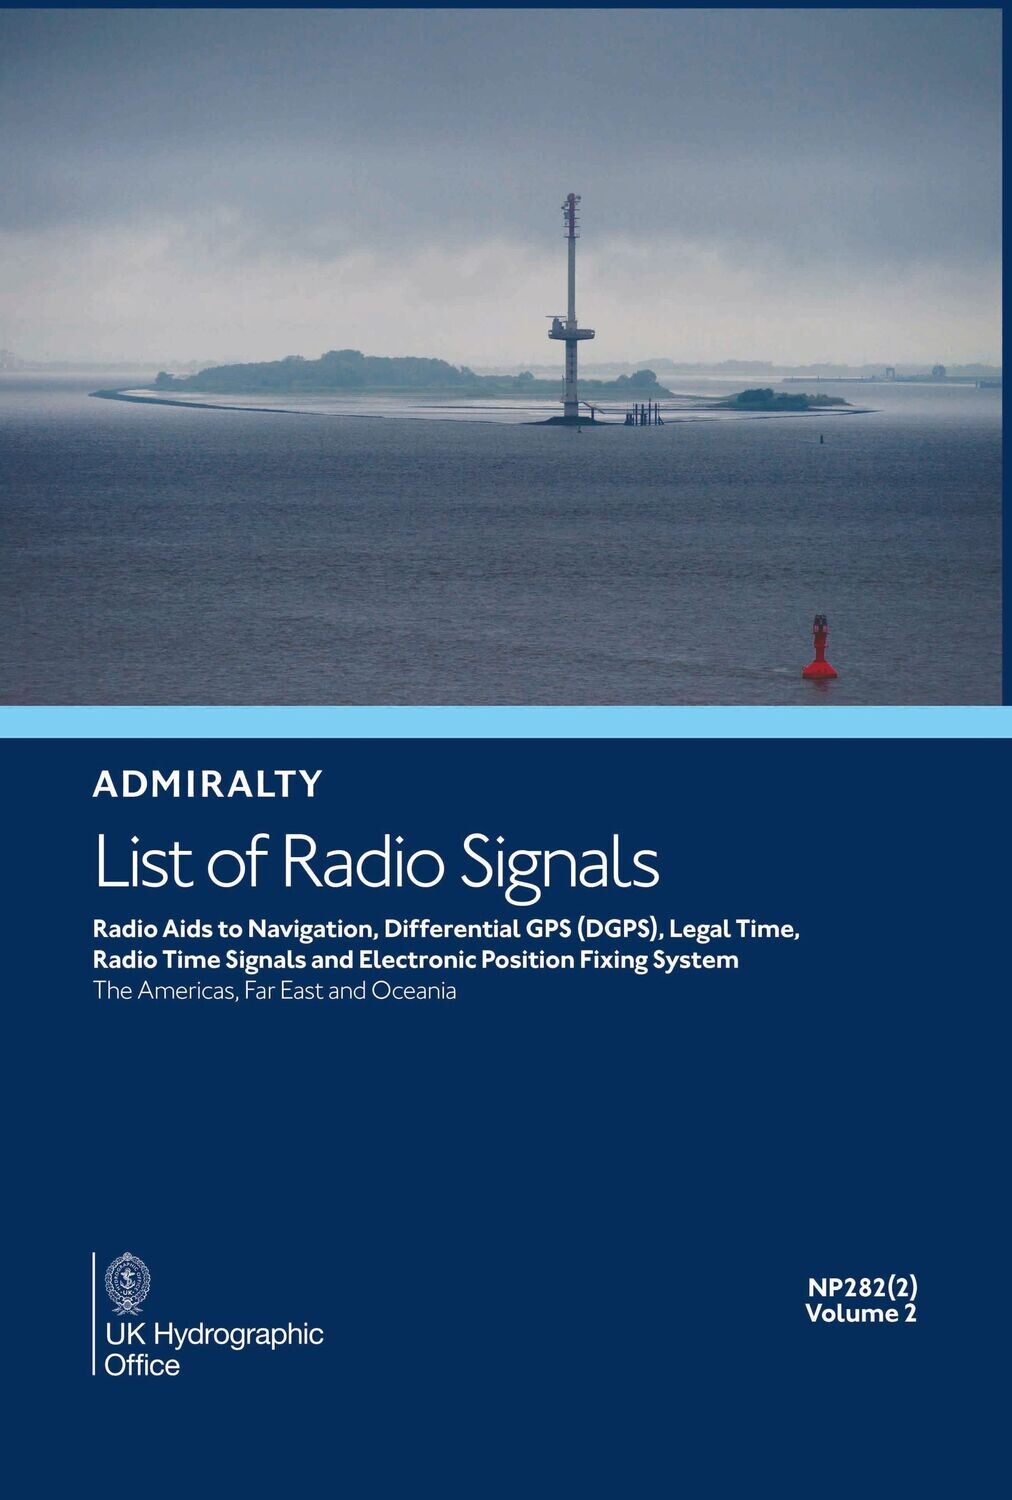 NP282(2) ADMIRALTY List of Radio Signals Vol 2. Part 2 - The Americas. Far East and Oceania